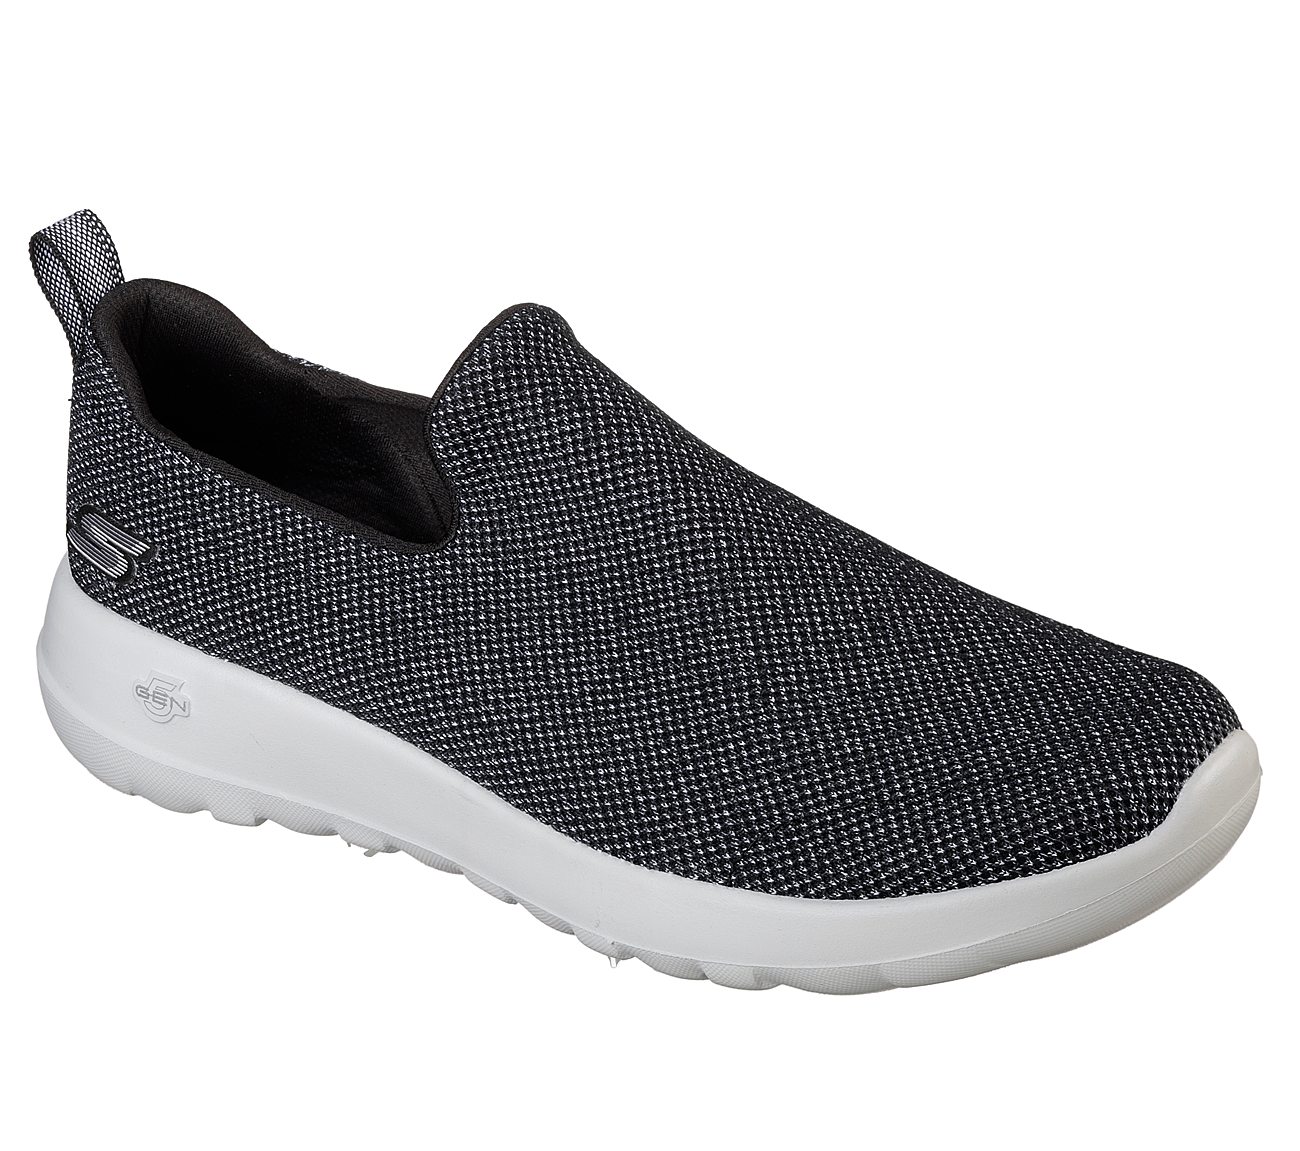 GO WALK MAX-CENTRIC, BLACK/GREY Footwear Lateral View